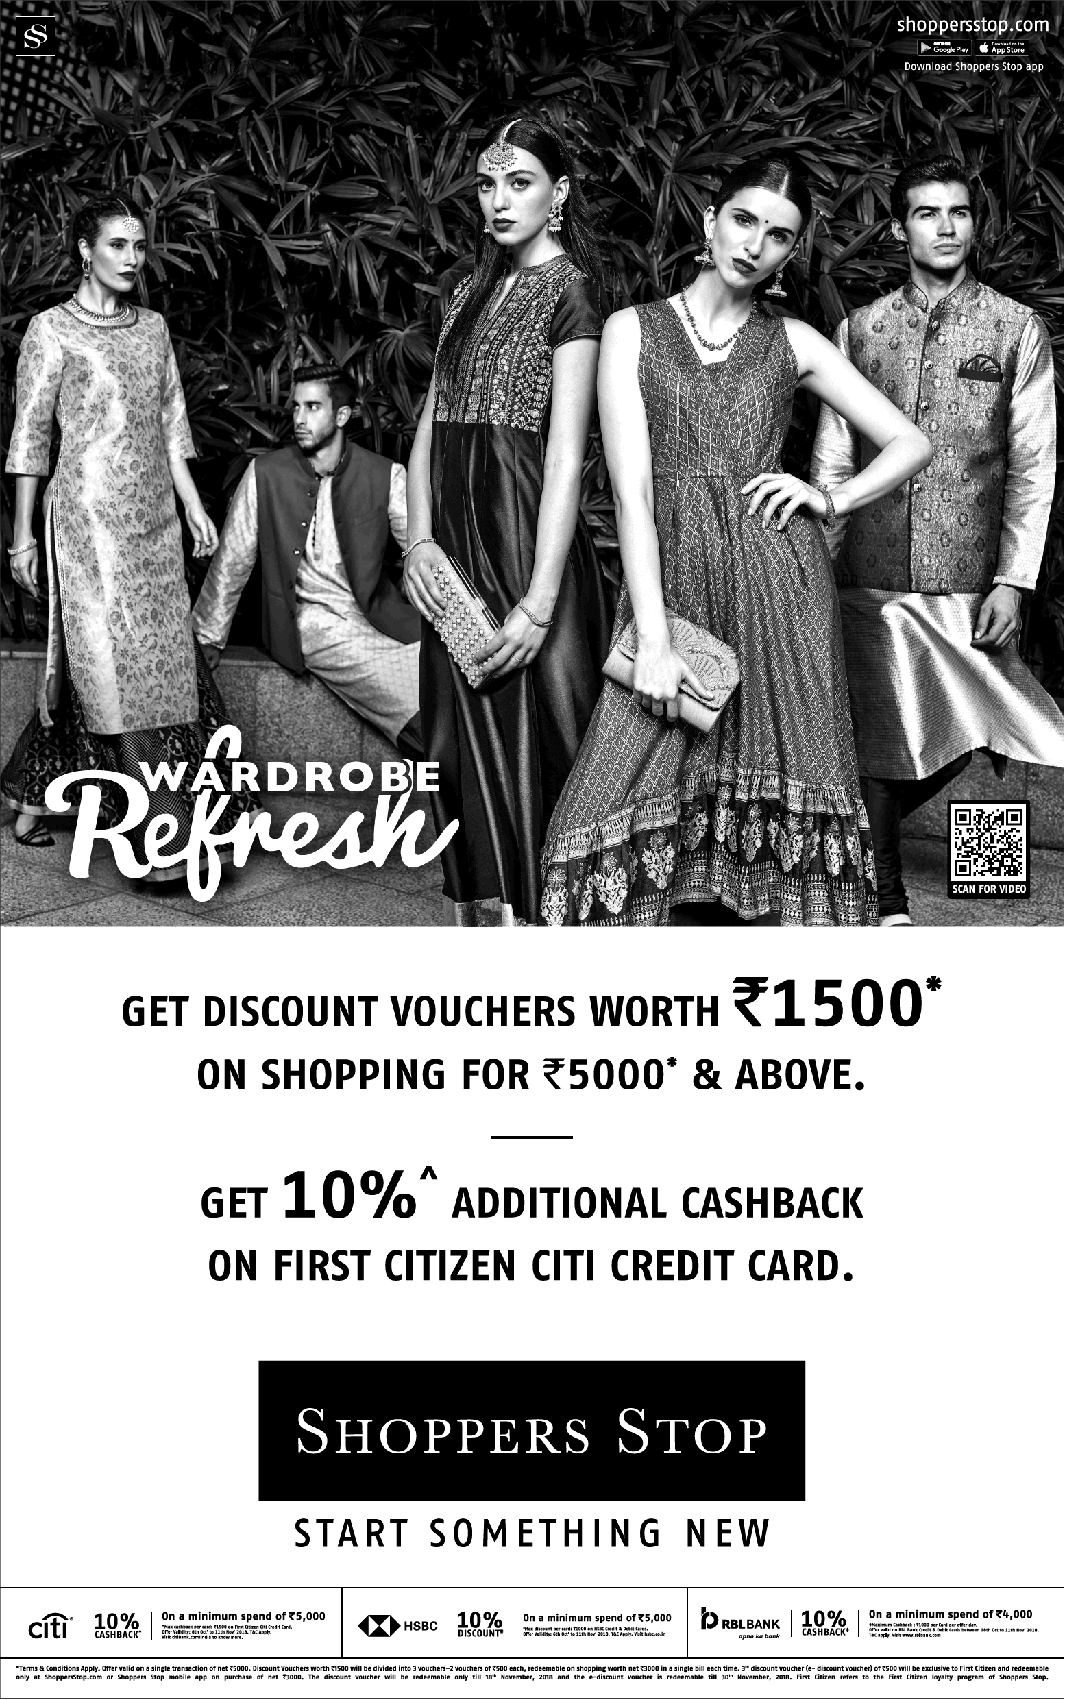 Shoppers Stop Wardrobe Refresh Discount Vouchers Ad - Advert Gallery